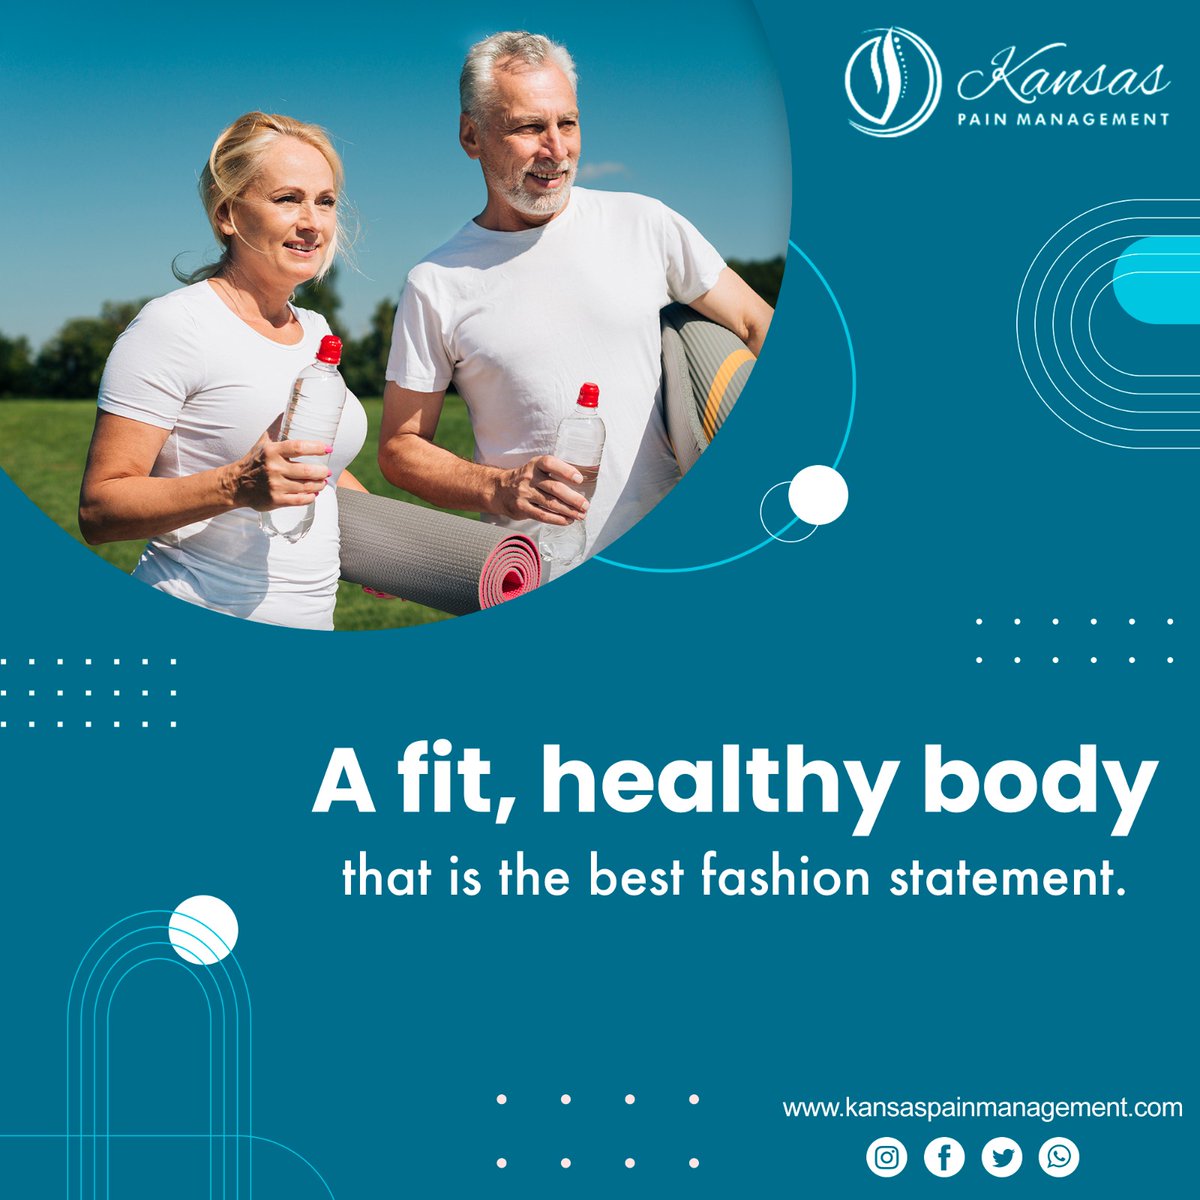 It's a Monday Morning with #MotivationalMonday
message from Team KPM....
Want to have best Fashion Statement ?
Stay Fit, Stay Healthy...
That is the best thing we can have not for just fashion
sense but in terms of living our fullest potential..
#ChooseHealth